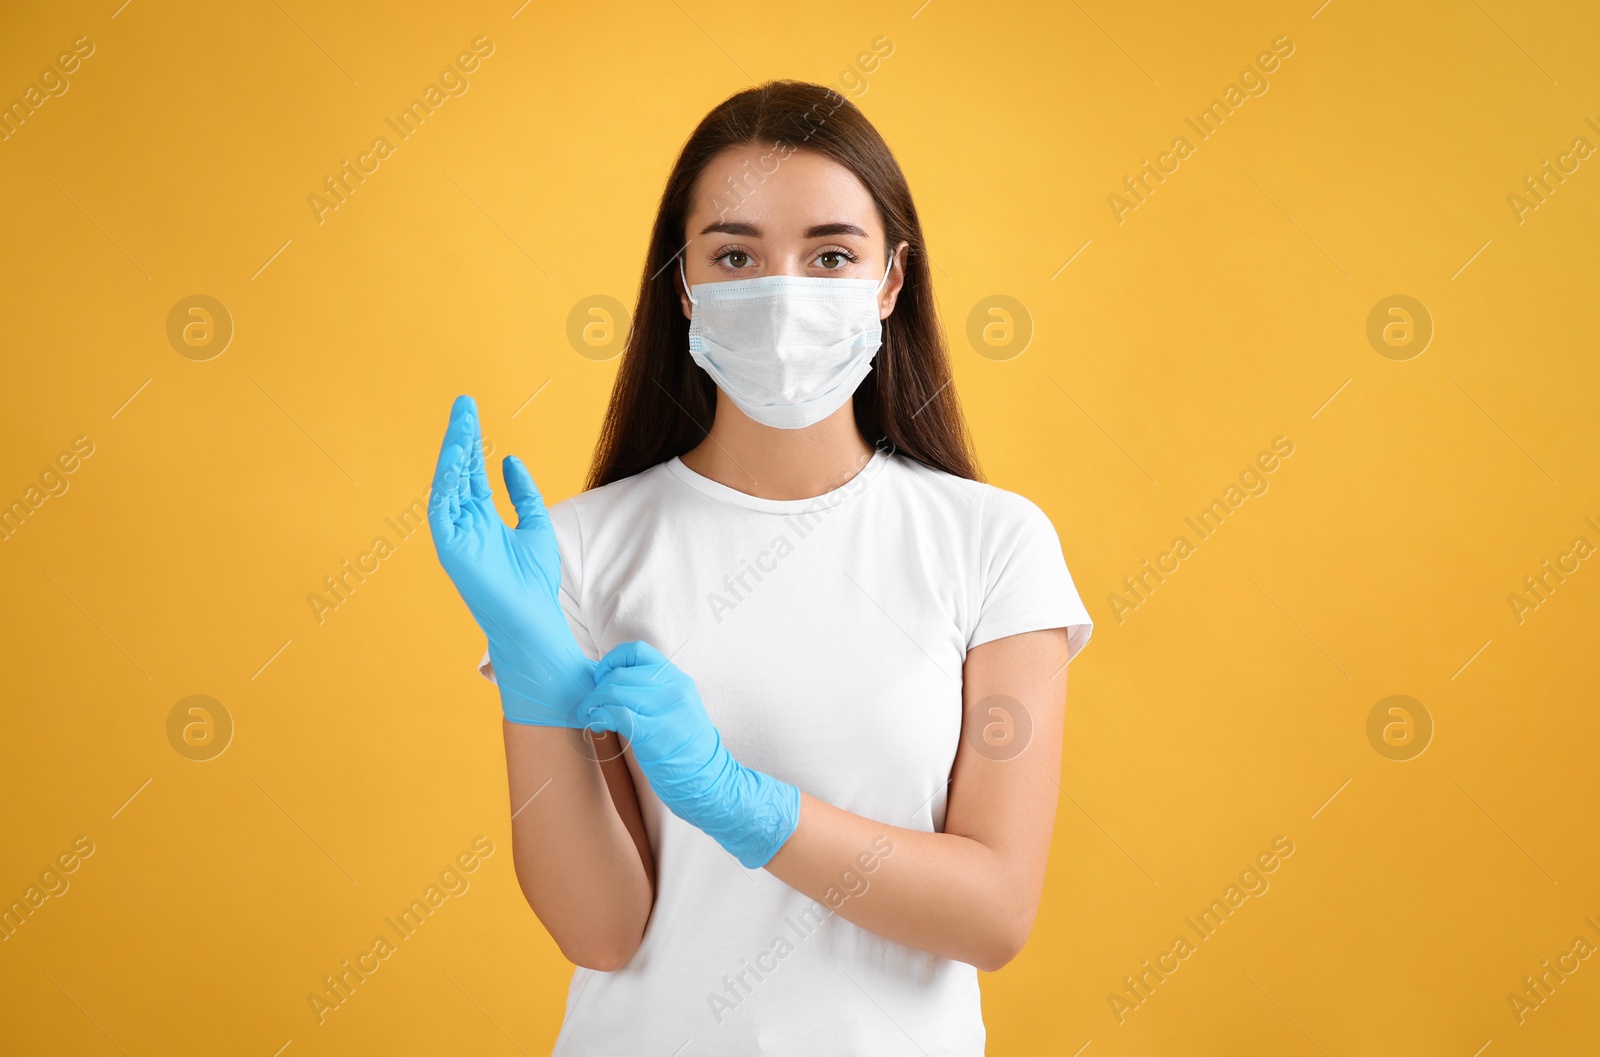 Photo of Woman in protective face mask putting on medical gloves against yellow background